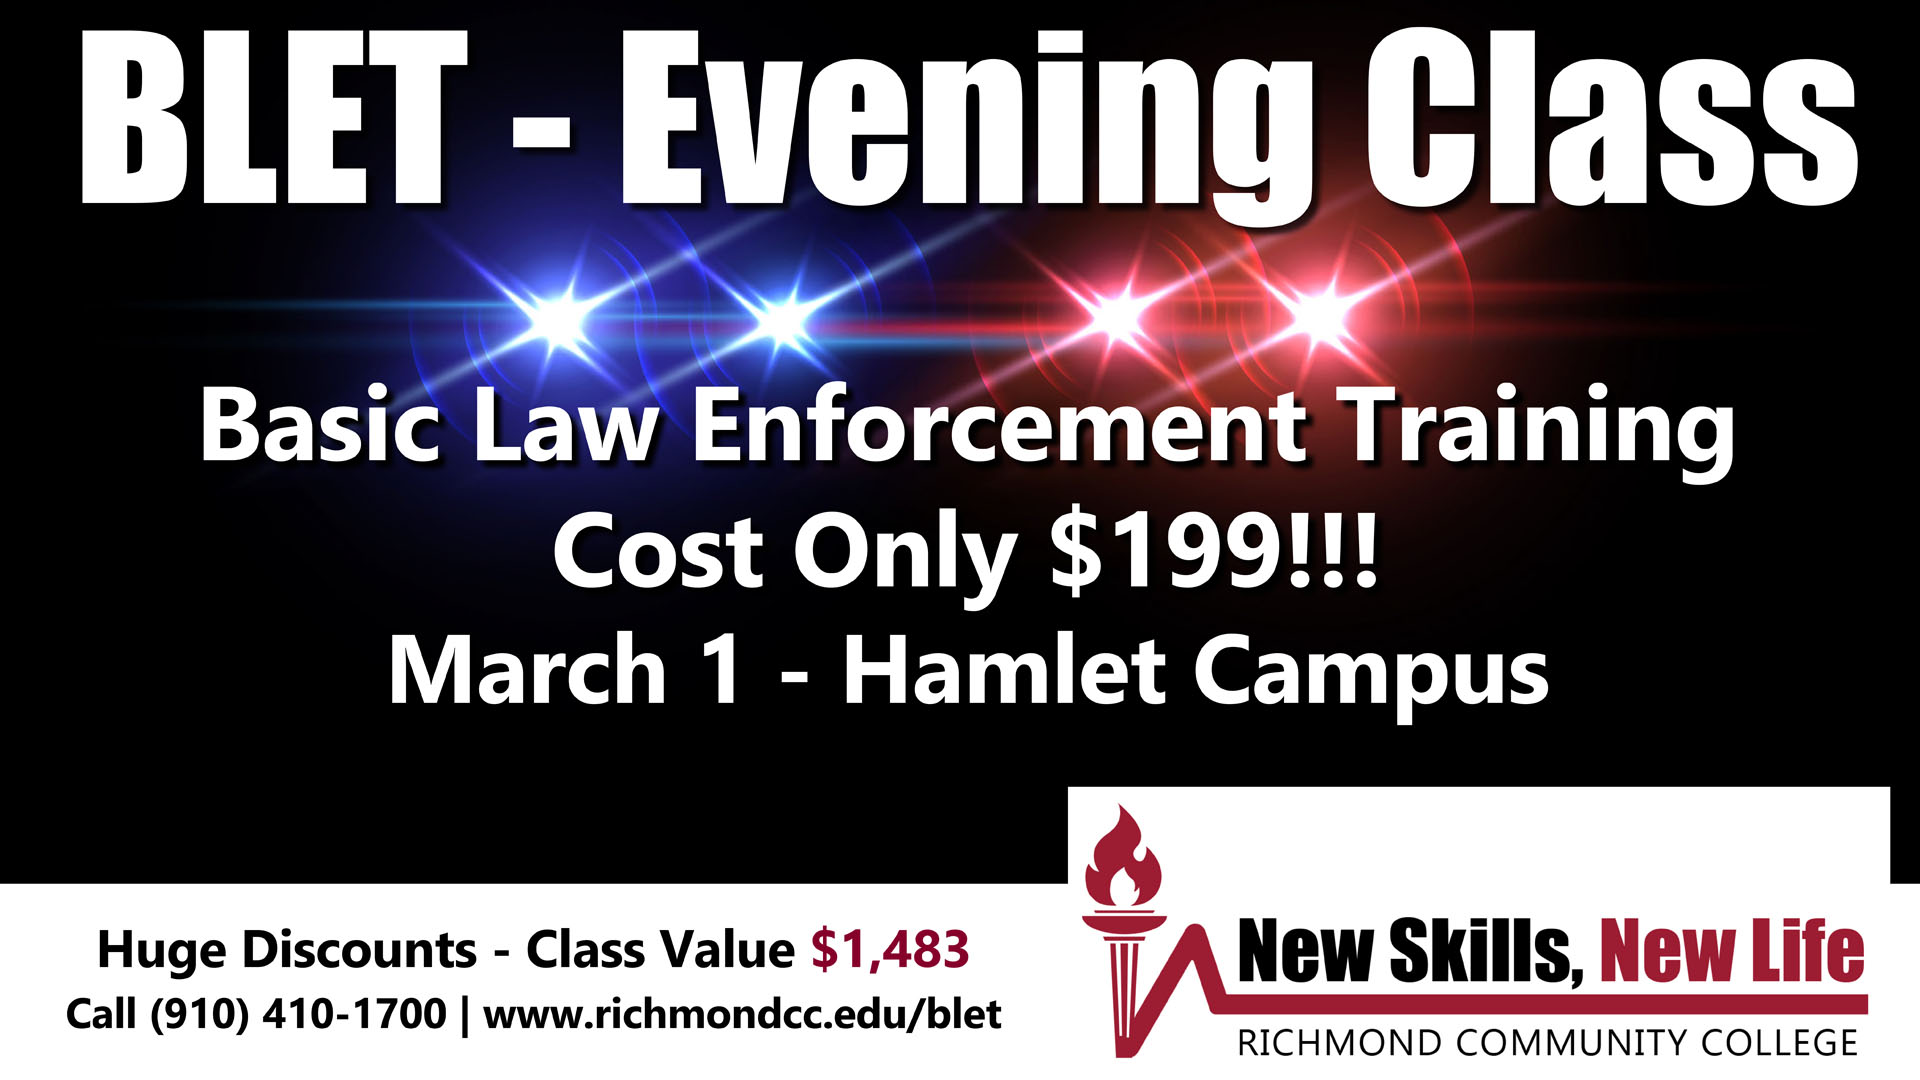 BLET Evening Class Cost Only $199 Starts March 1